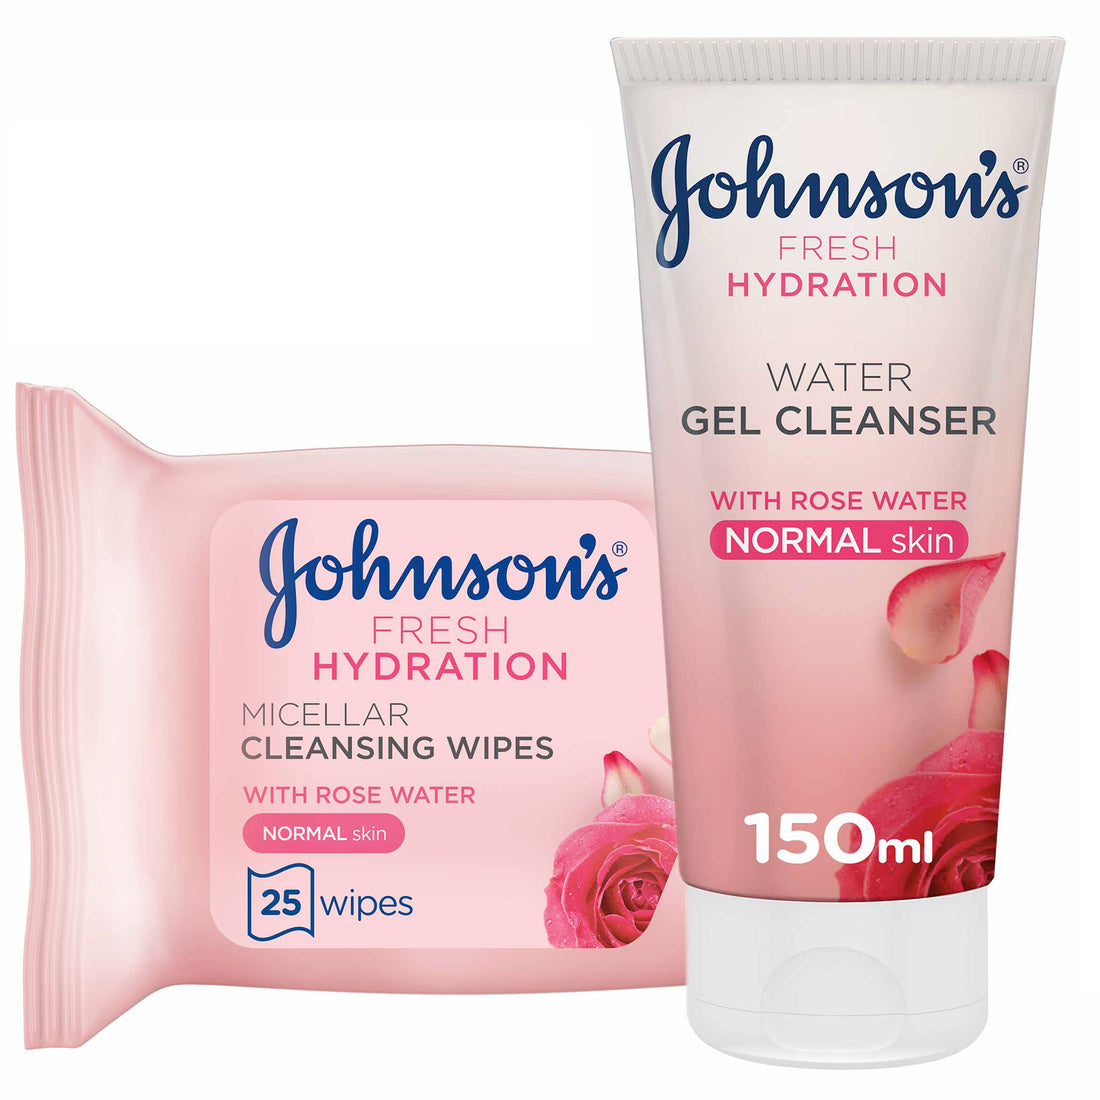 JOHNSON’S Fresh Hydration, Water Gel Cleanser 200ml + Cleansing Facial Micellar Wipes, 25 wipes